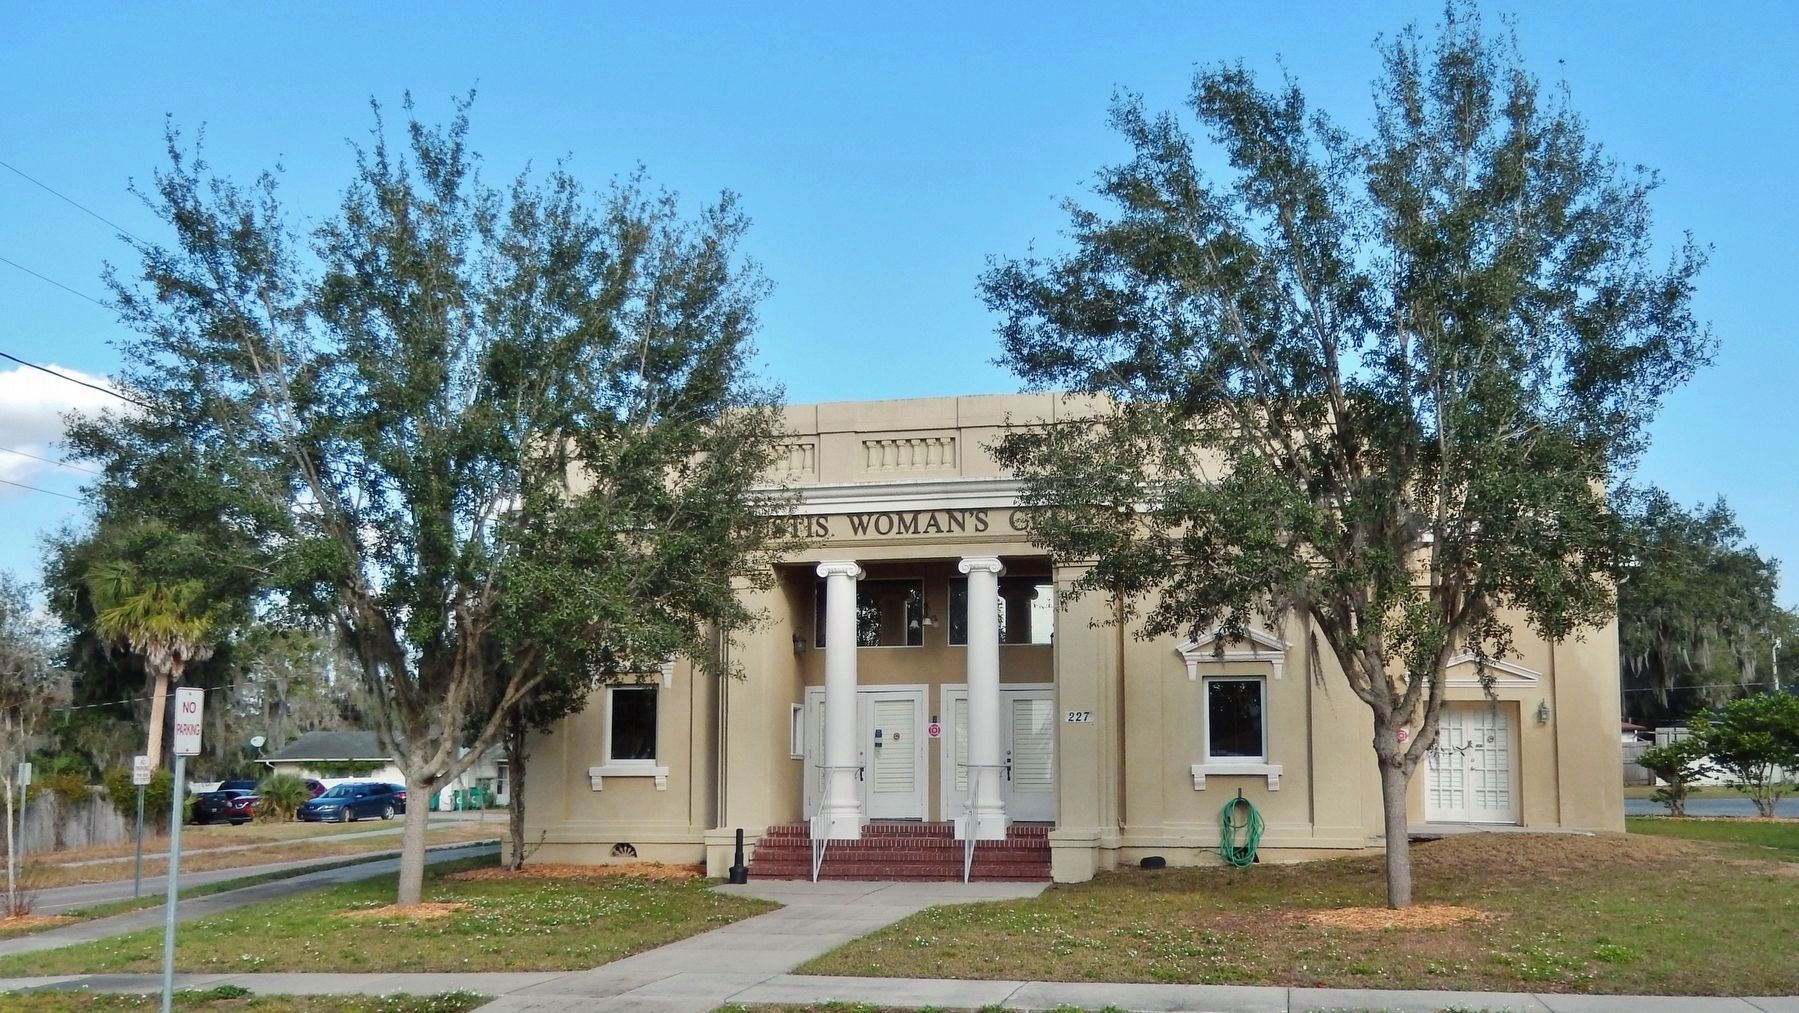 Woman's Club of Eustis Building (<i>west/front elevation</i>) image. Click for full size.